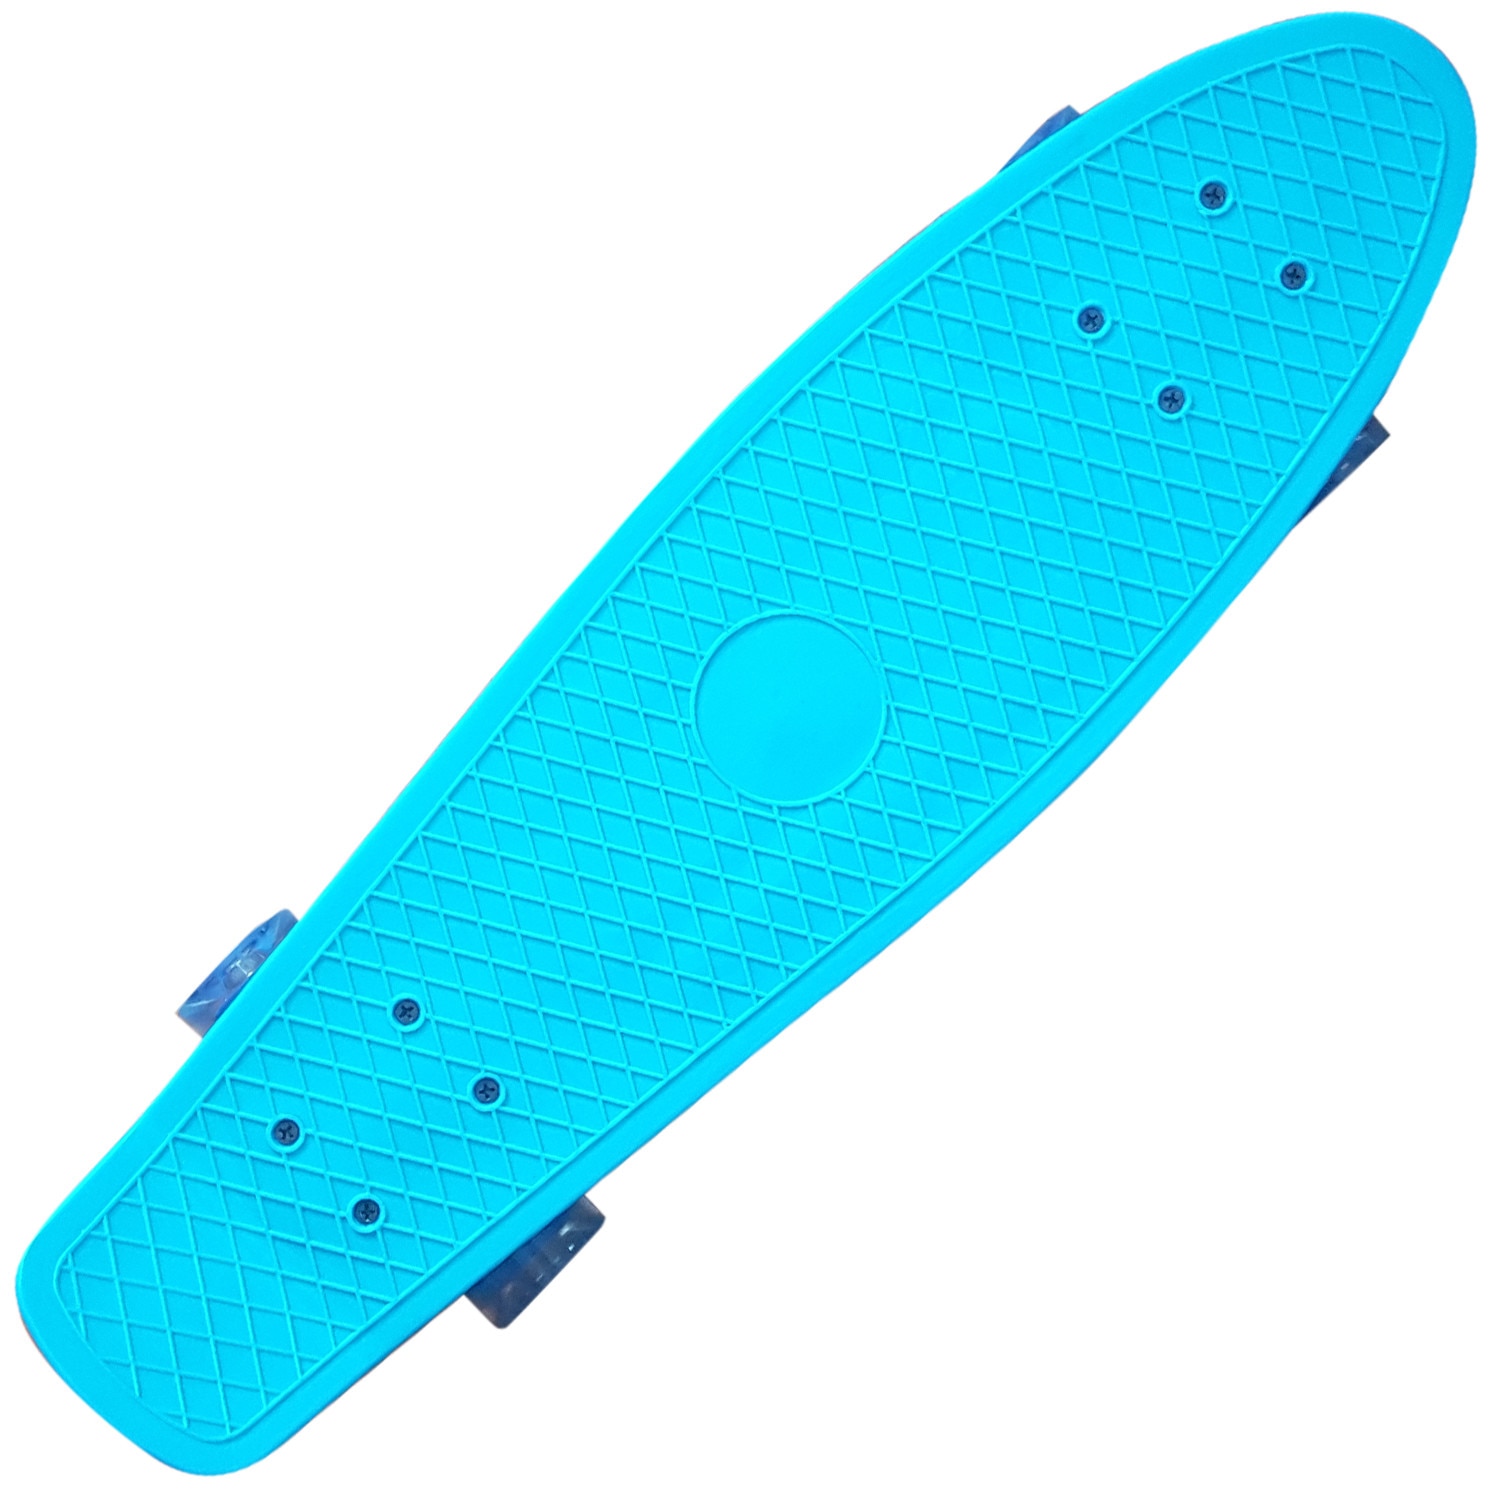 Persuasive Heap of Transparently Penny board 27” Action Runner ABEC-7 Albastru - eMAG.ro